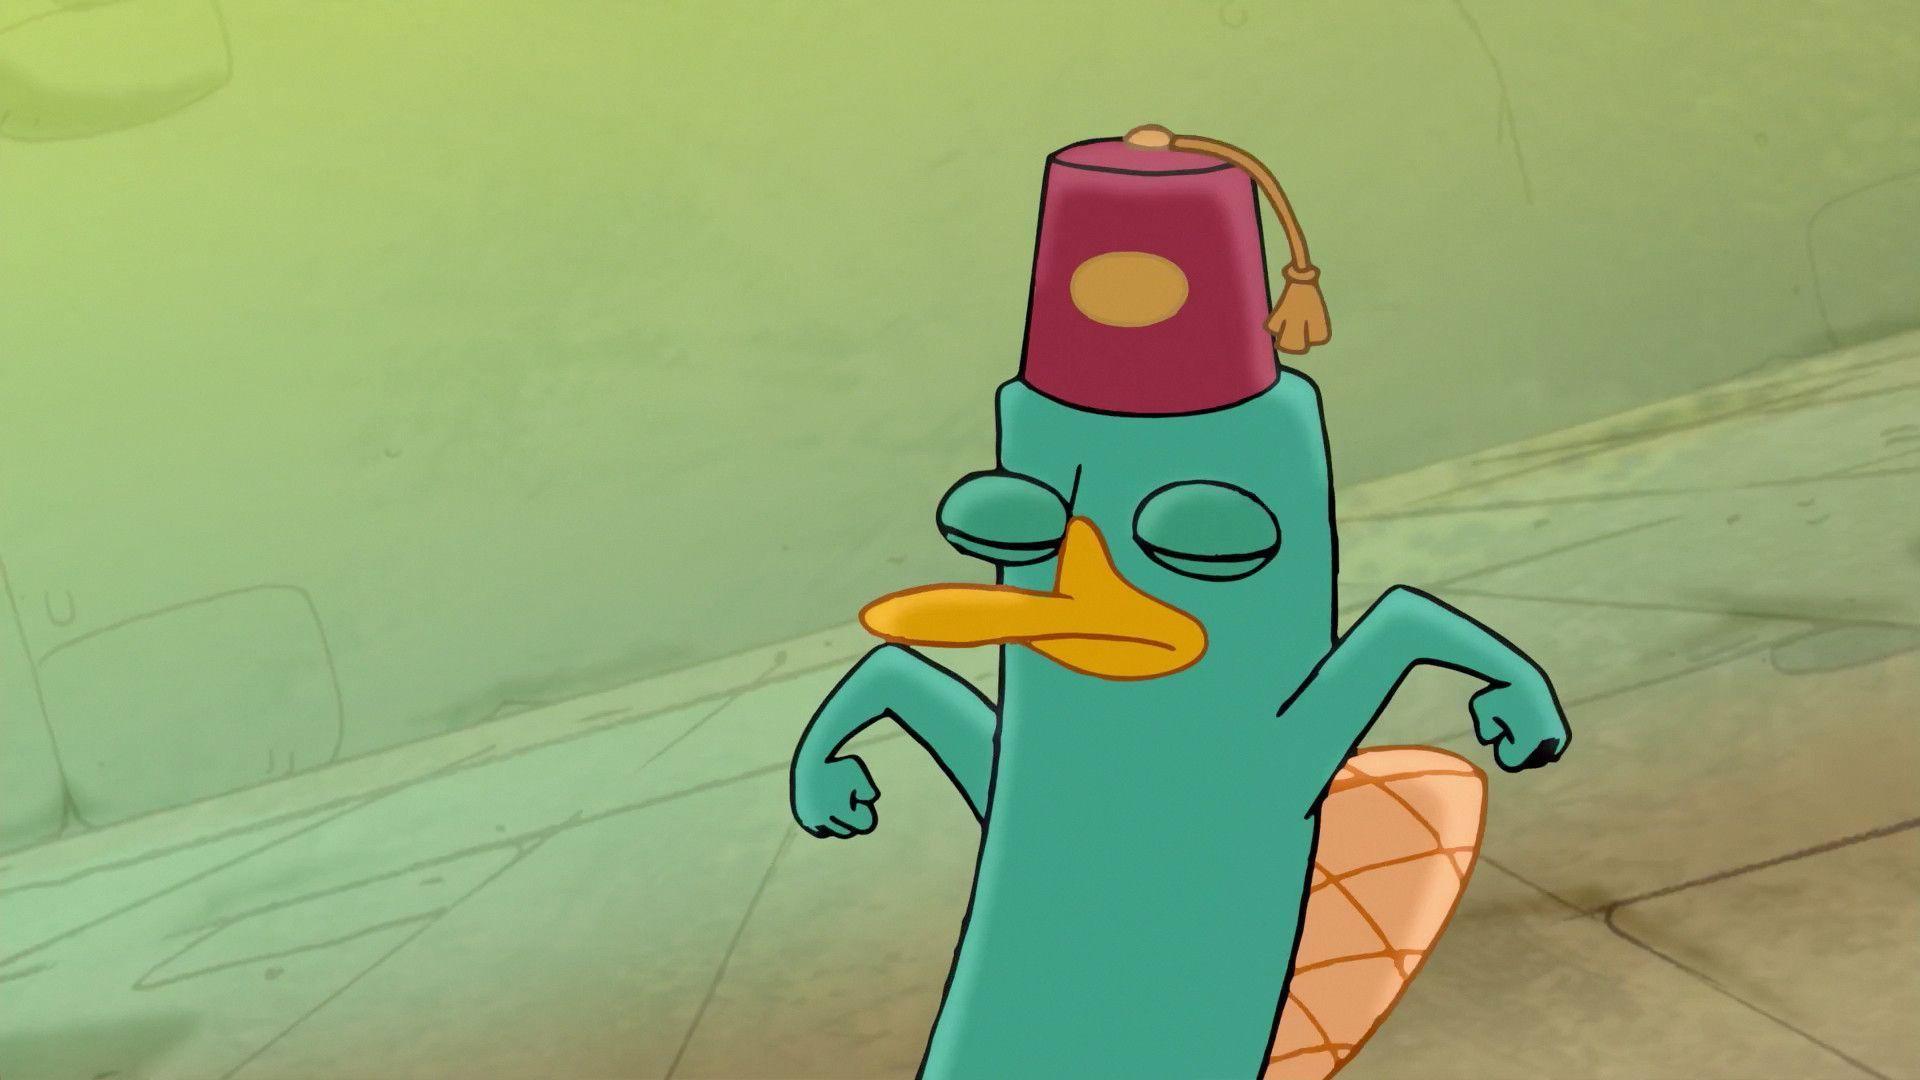 best image about perry the platypus Disney. HD